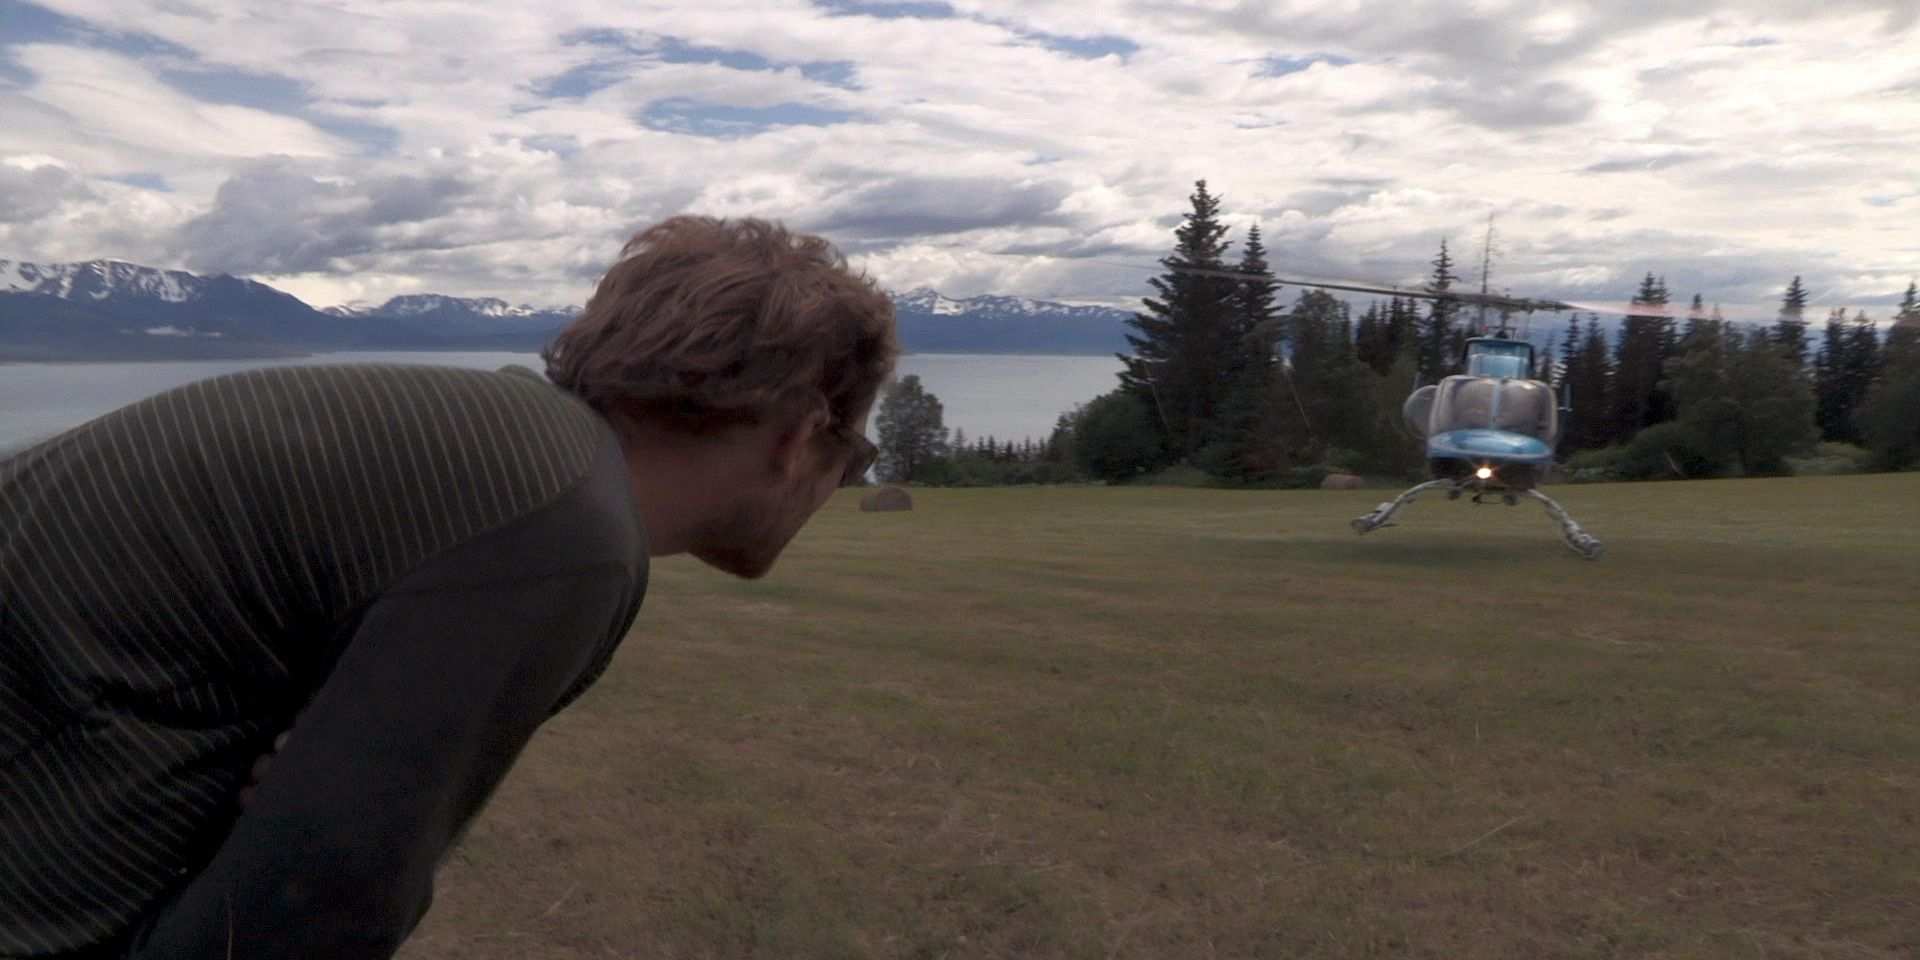 A helicopter mishap in the Discvovery show Alaska: The Last Frontier.